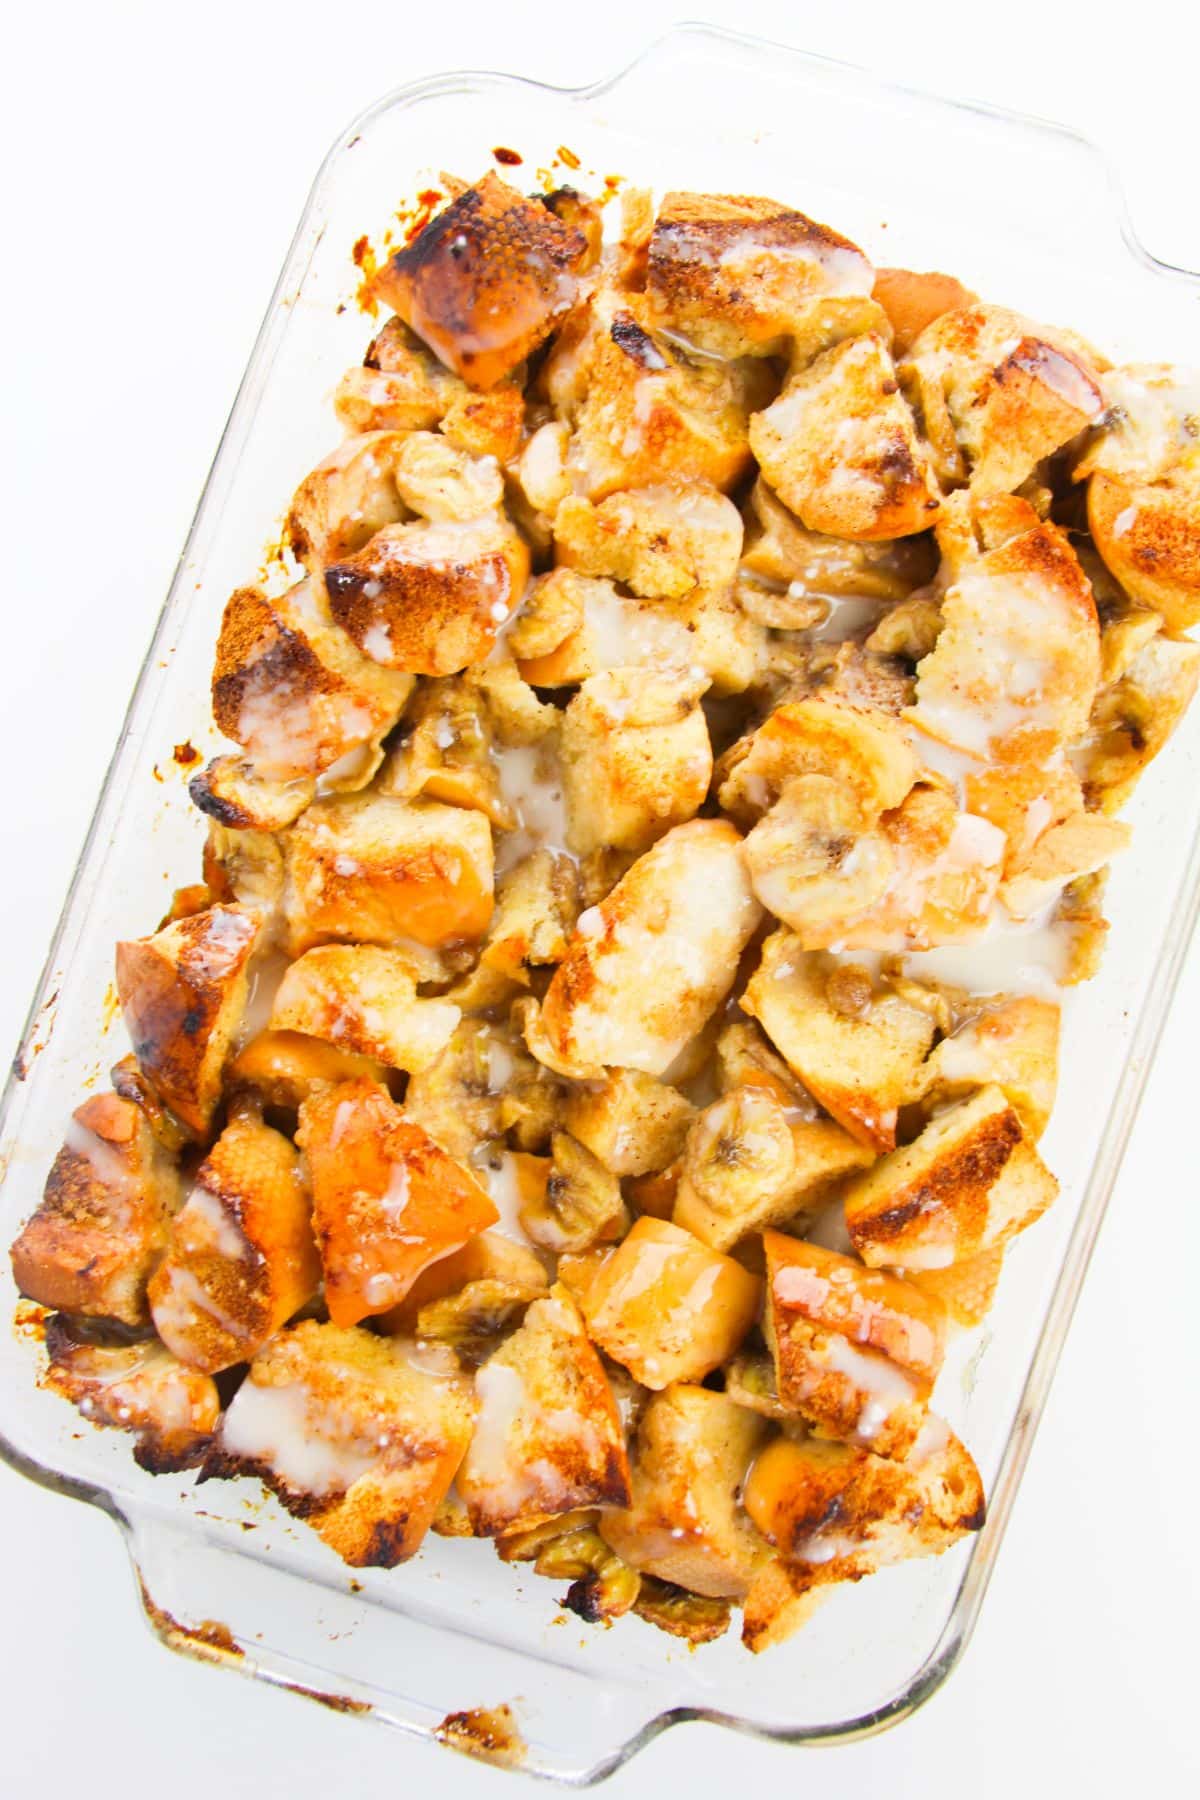 Banana bread pudding with glaze in a glass baking dish.